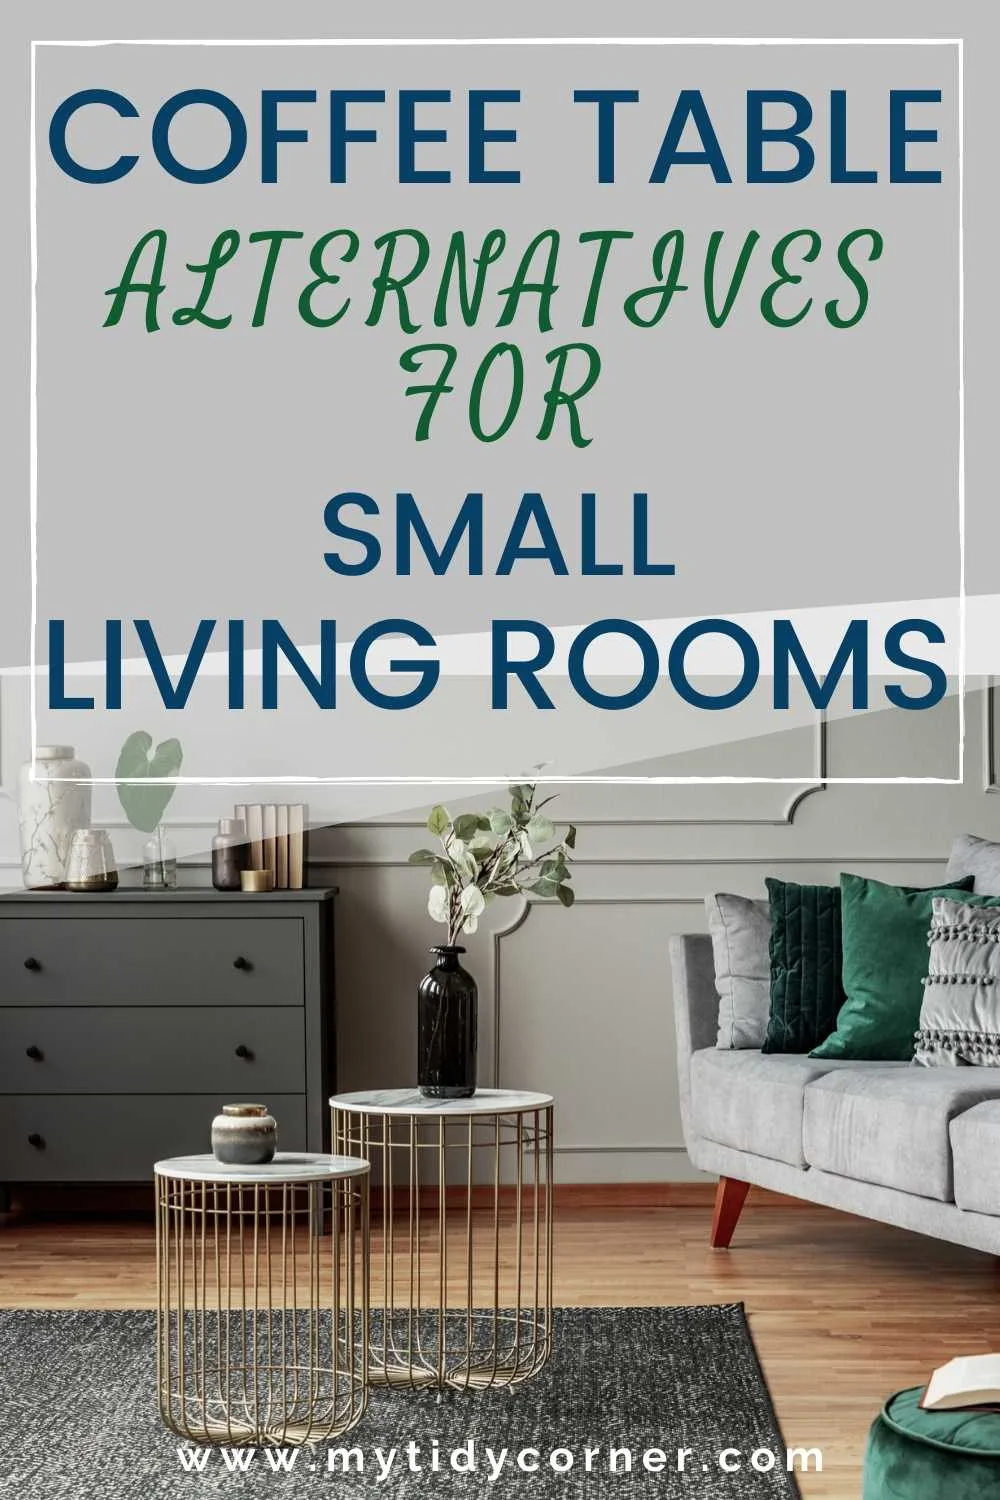 Coffee table alternatives for small living rooms